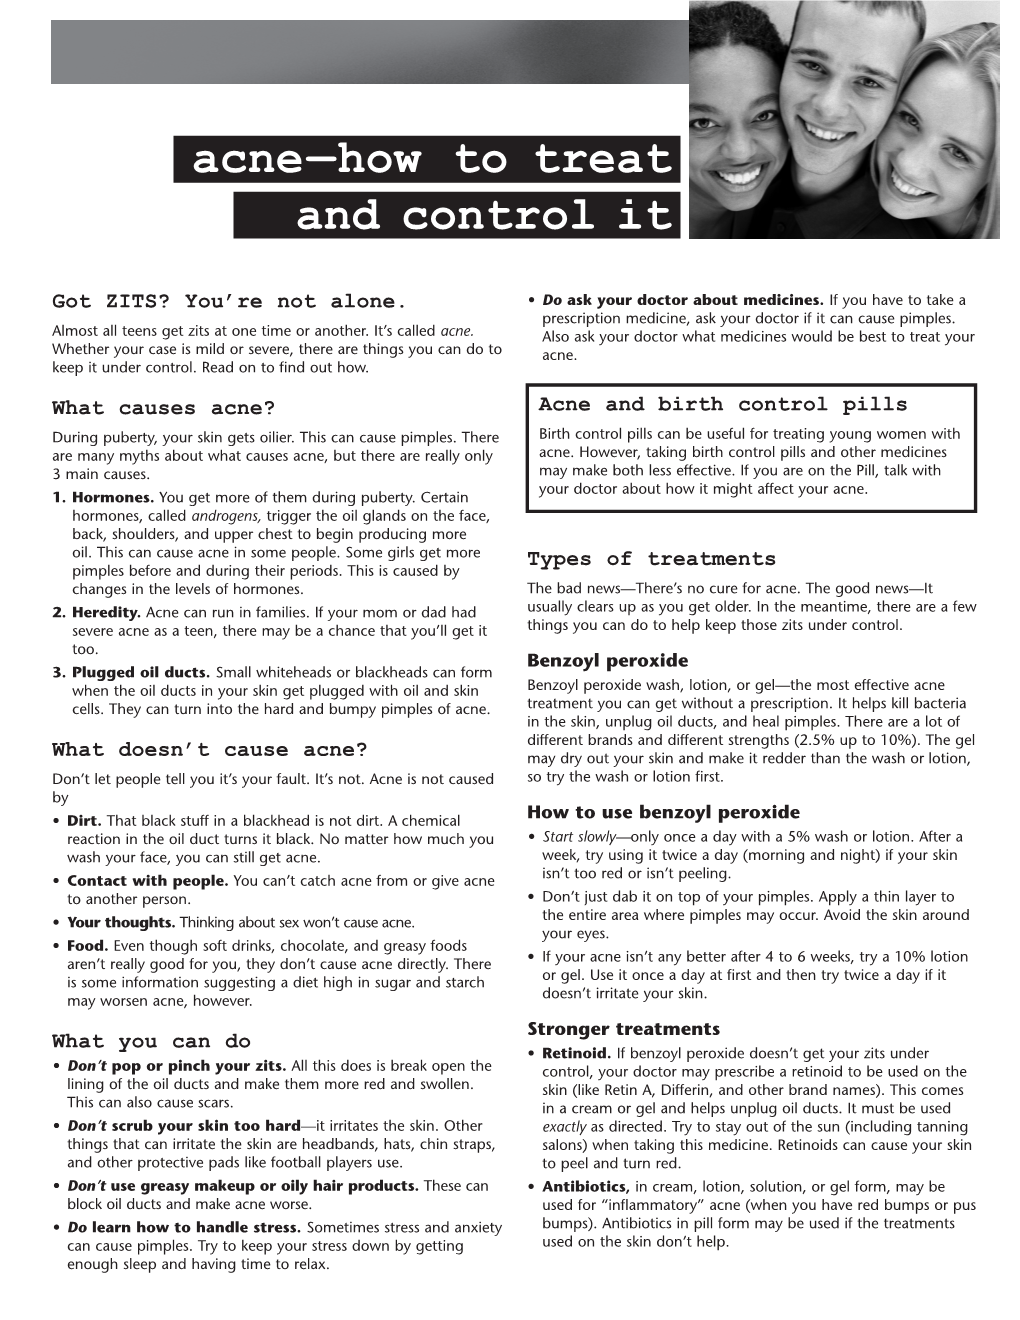 Acne—How to Treat and Control It